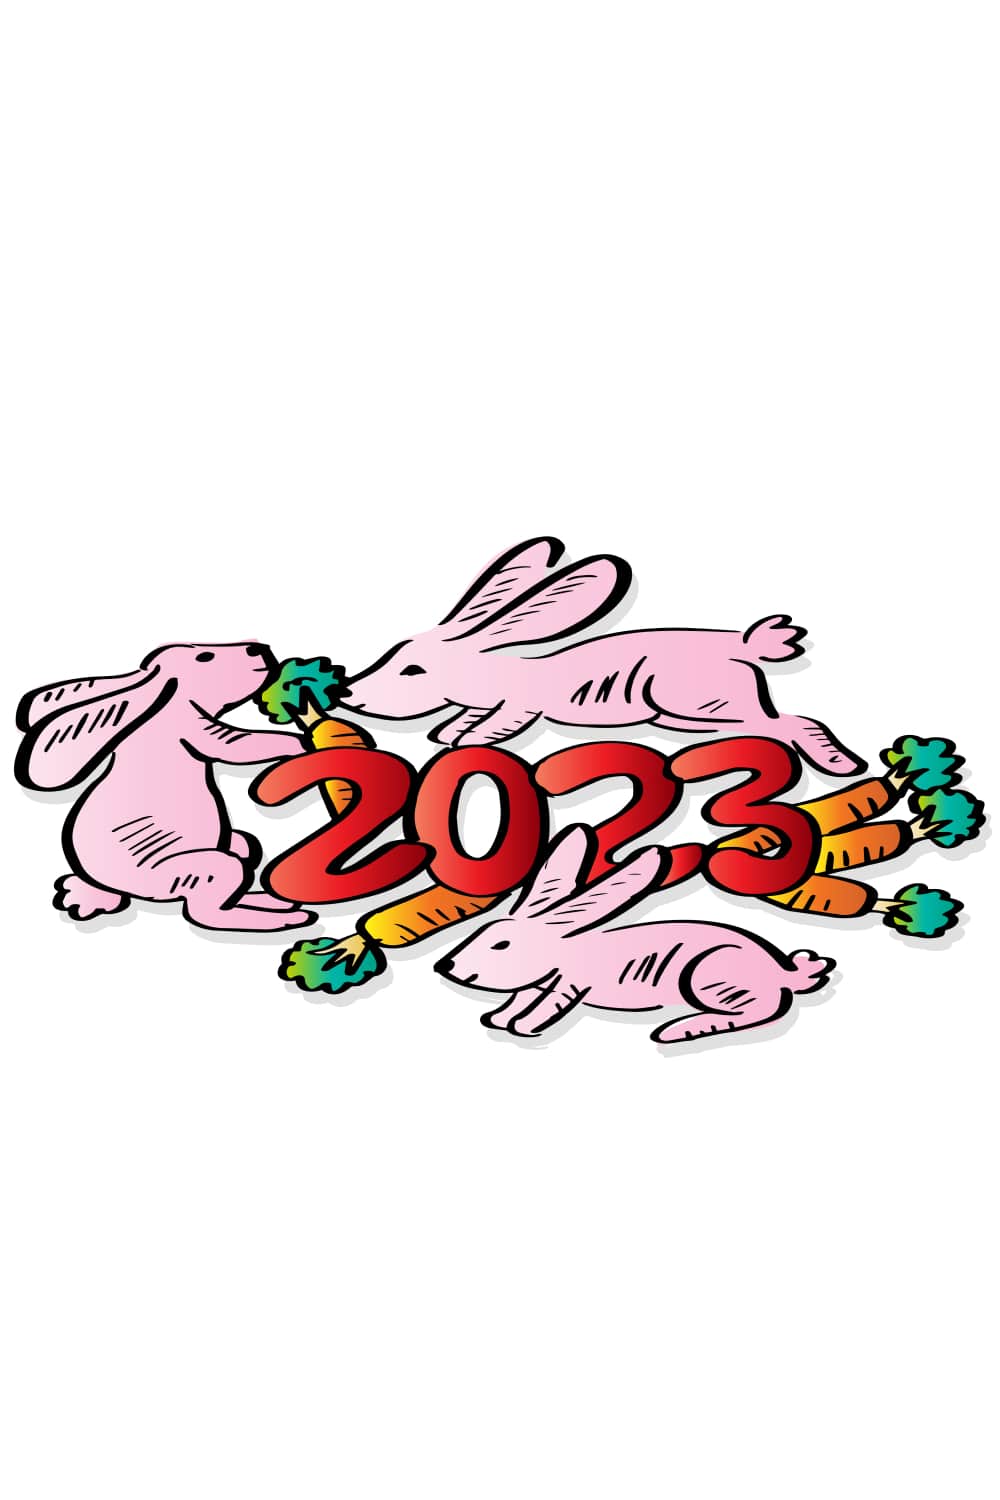 New Year 2023 Greeting Card with Rabbits Design pinterest image.